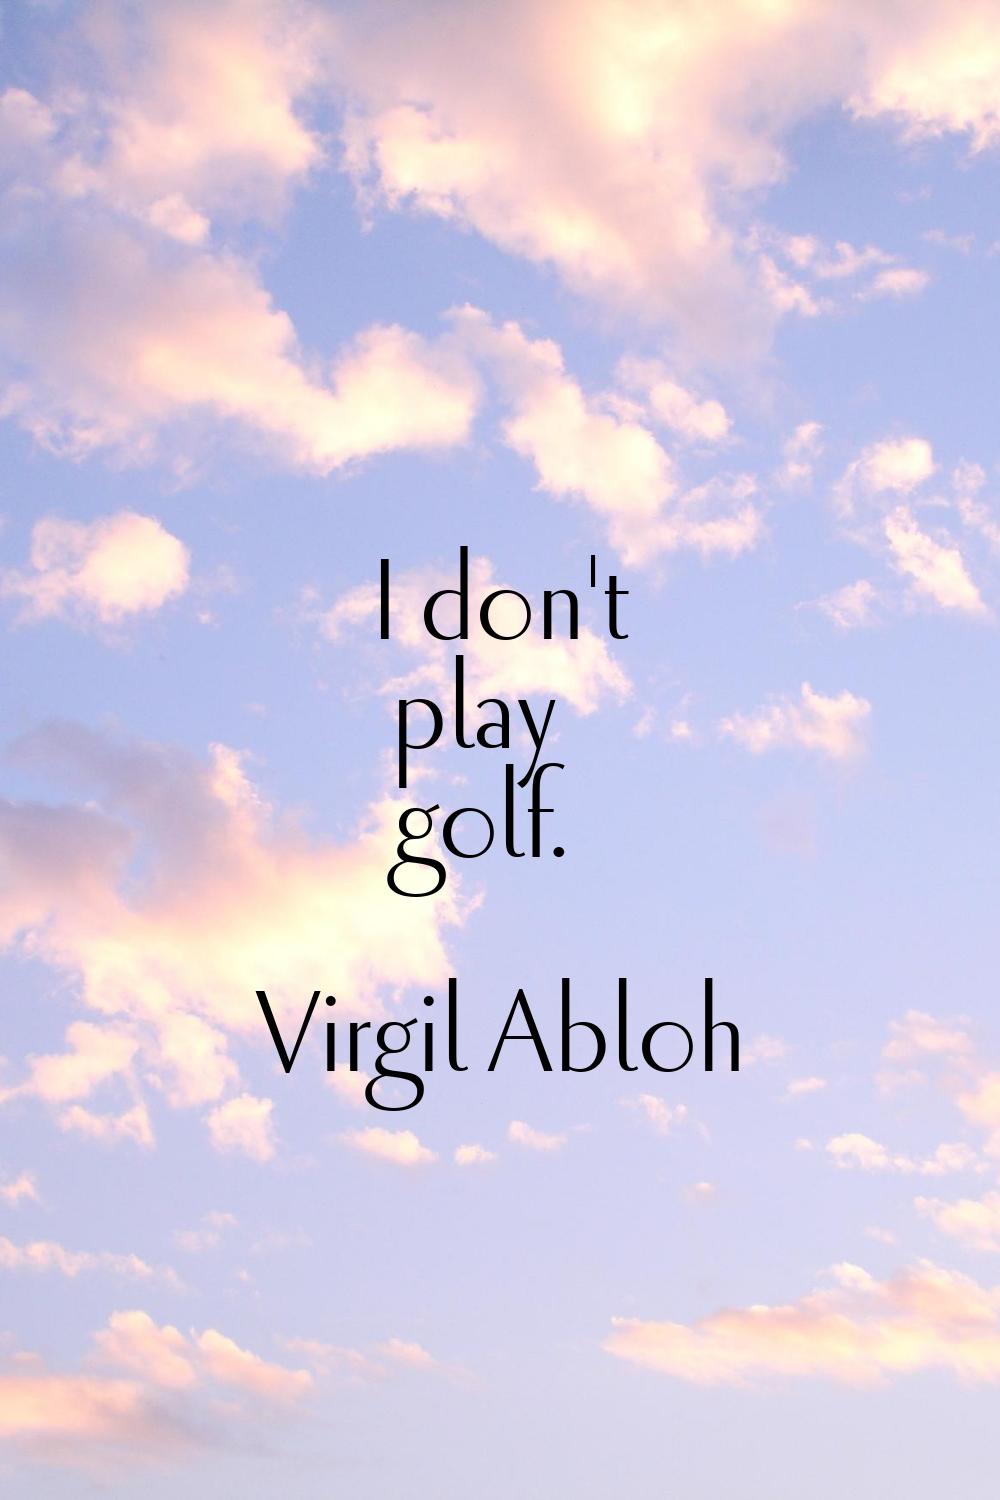 I don't play golf.